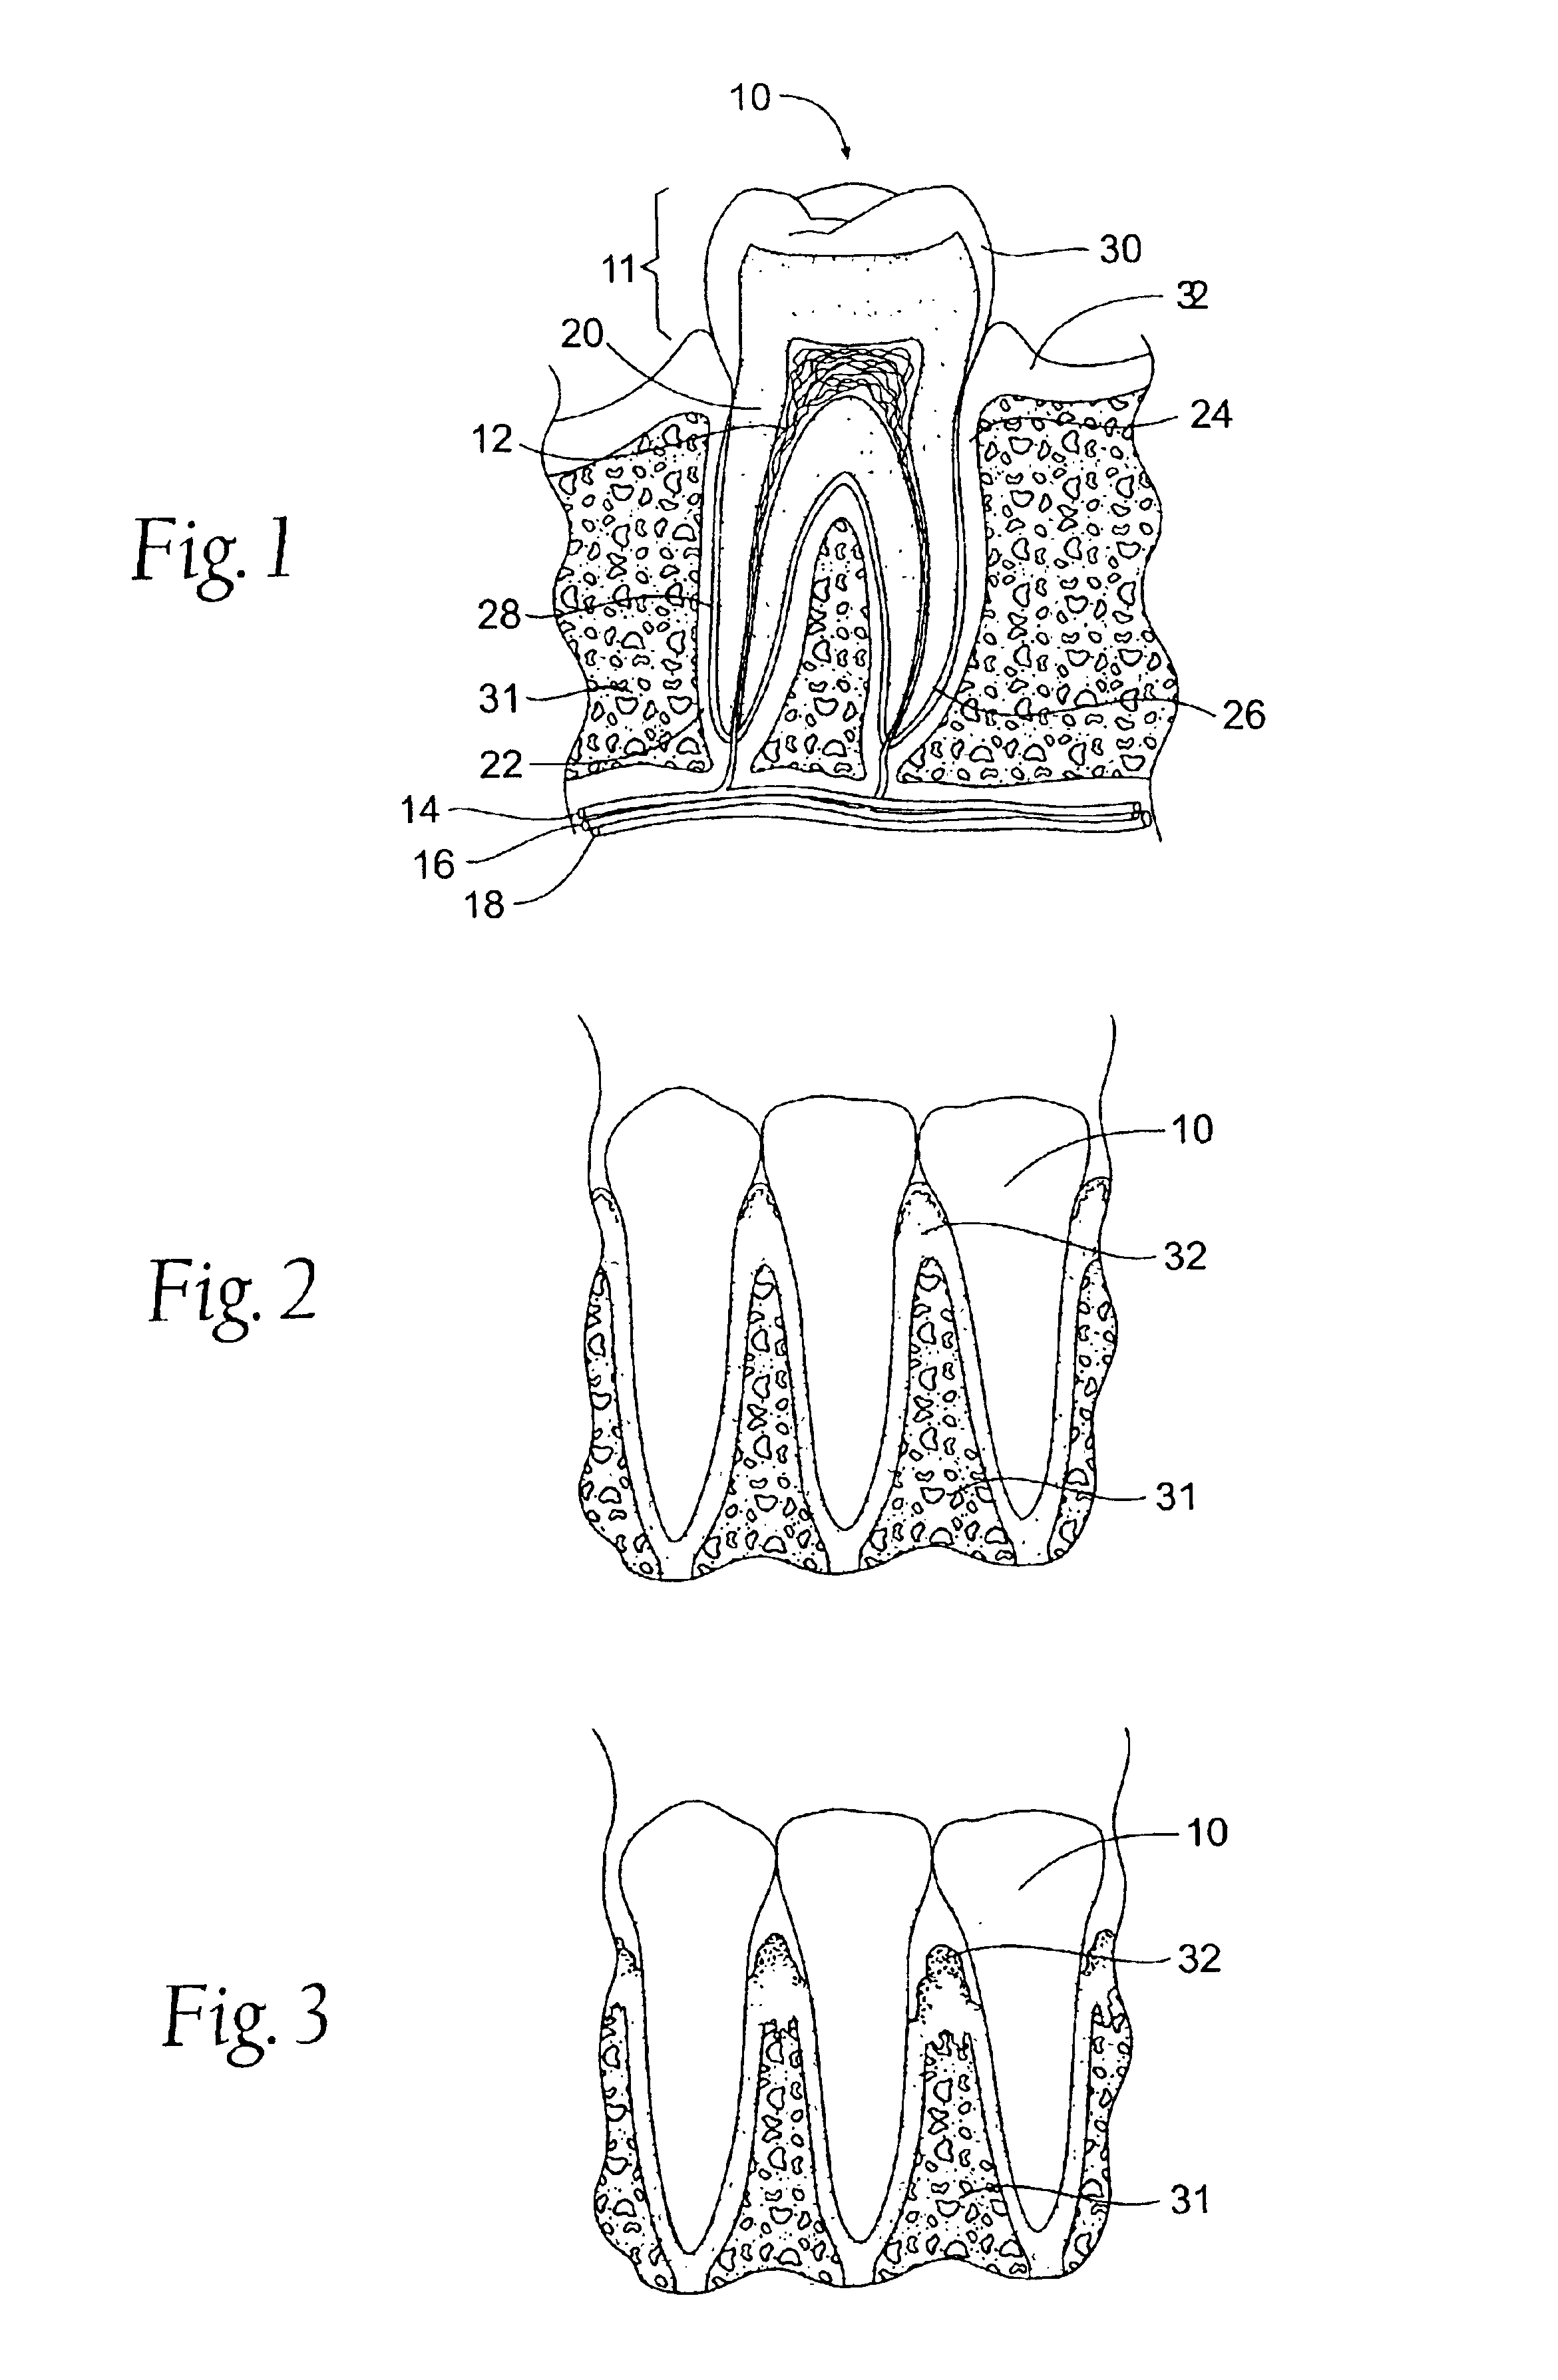 Expandable polymer dental implant and method of use